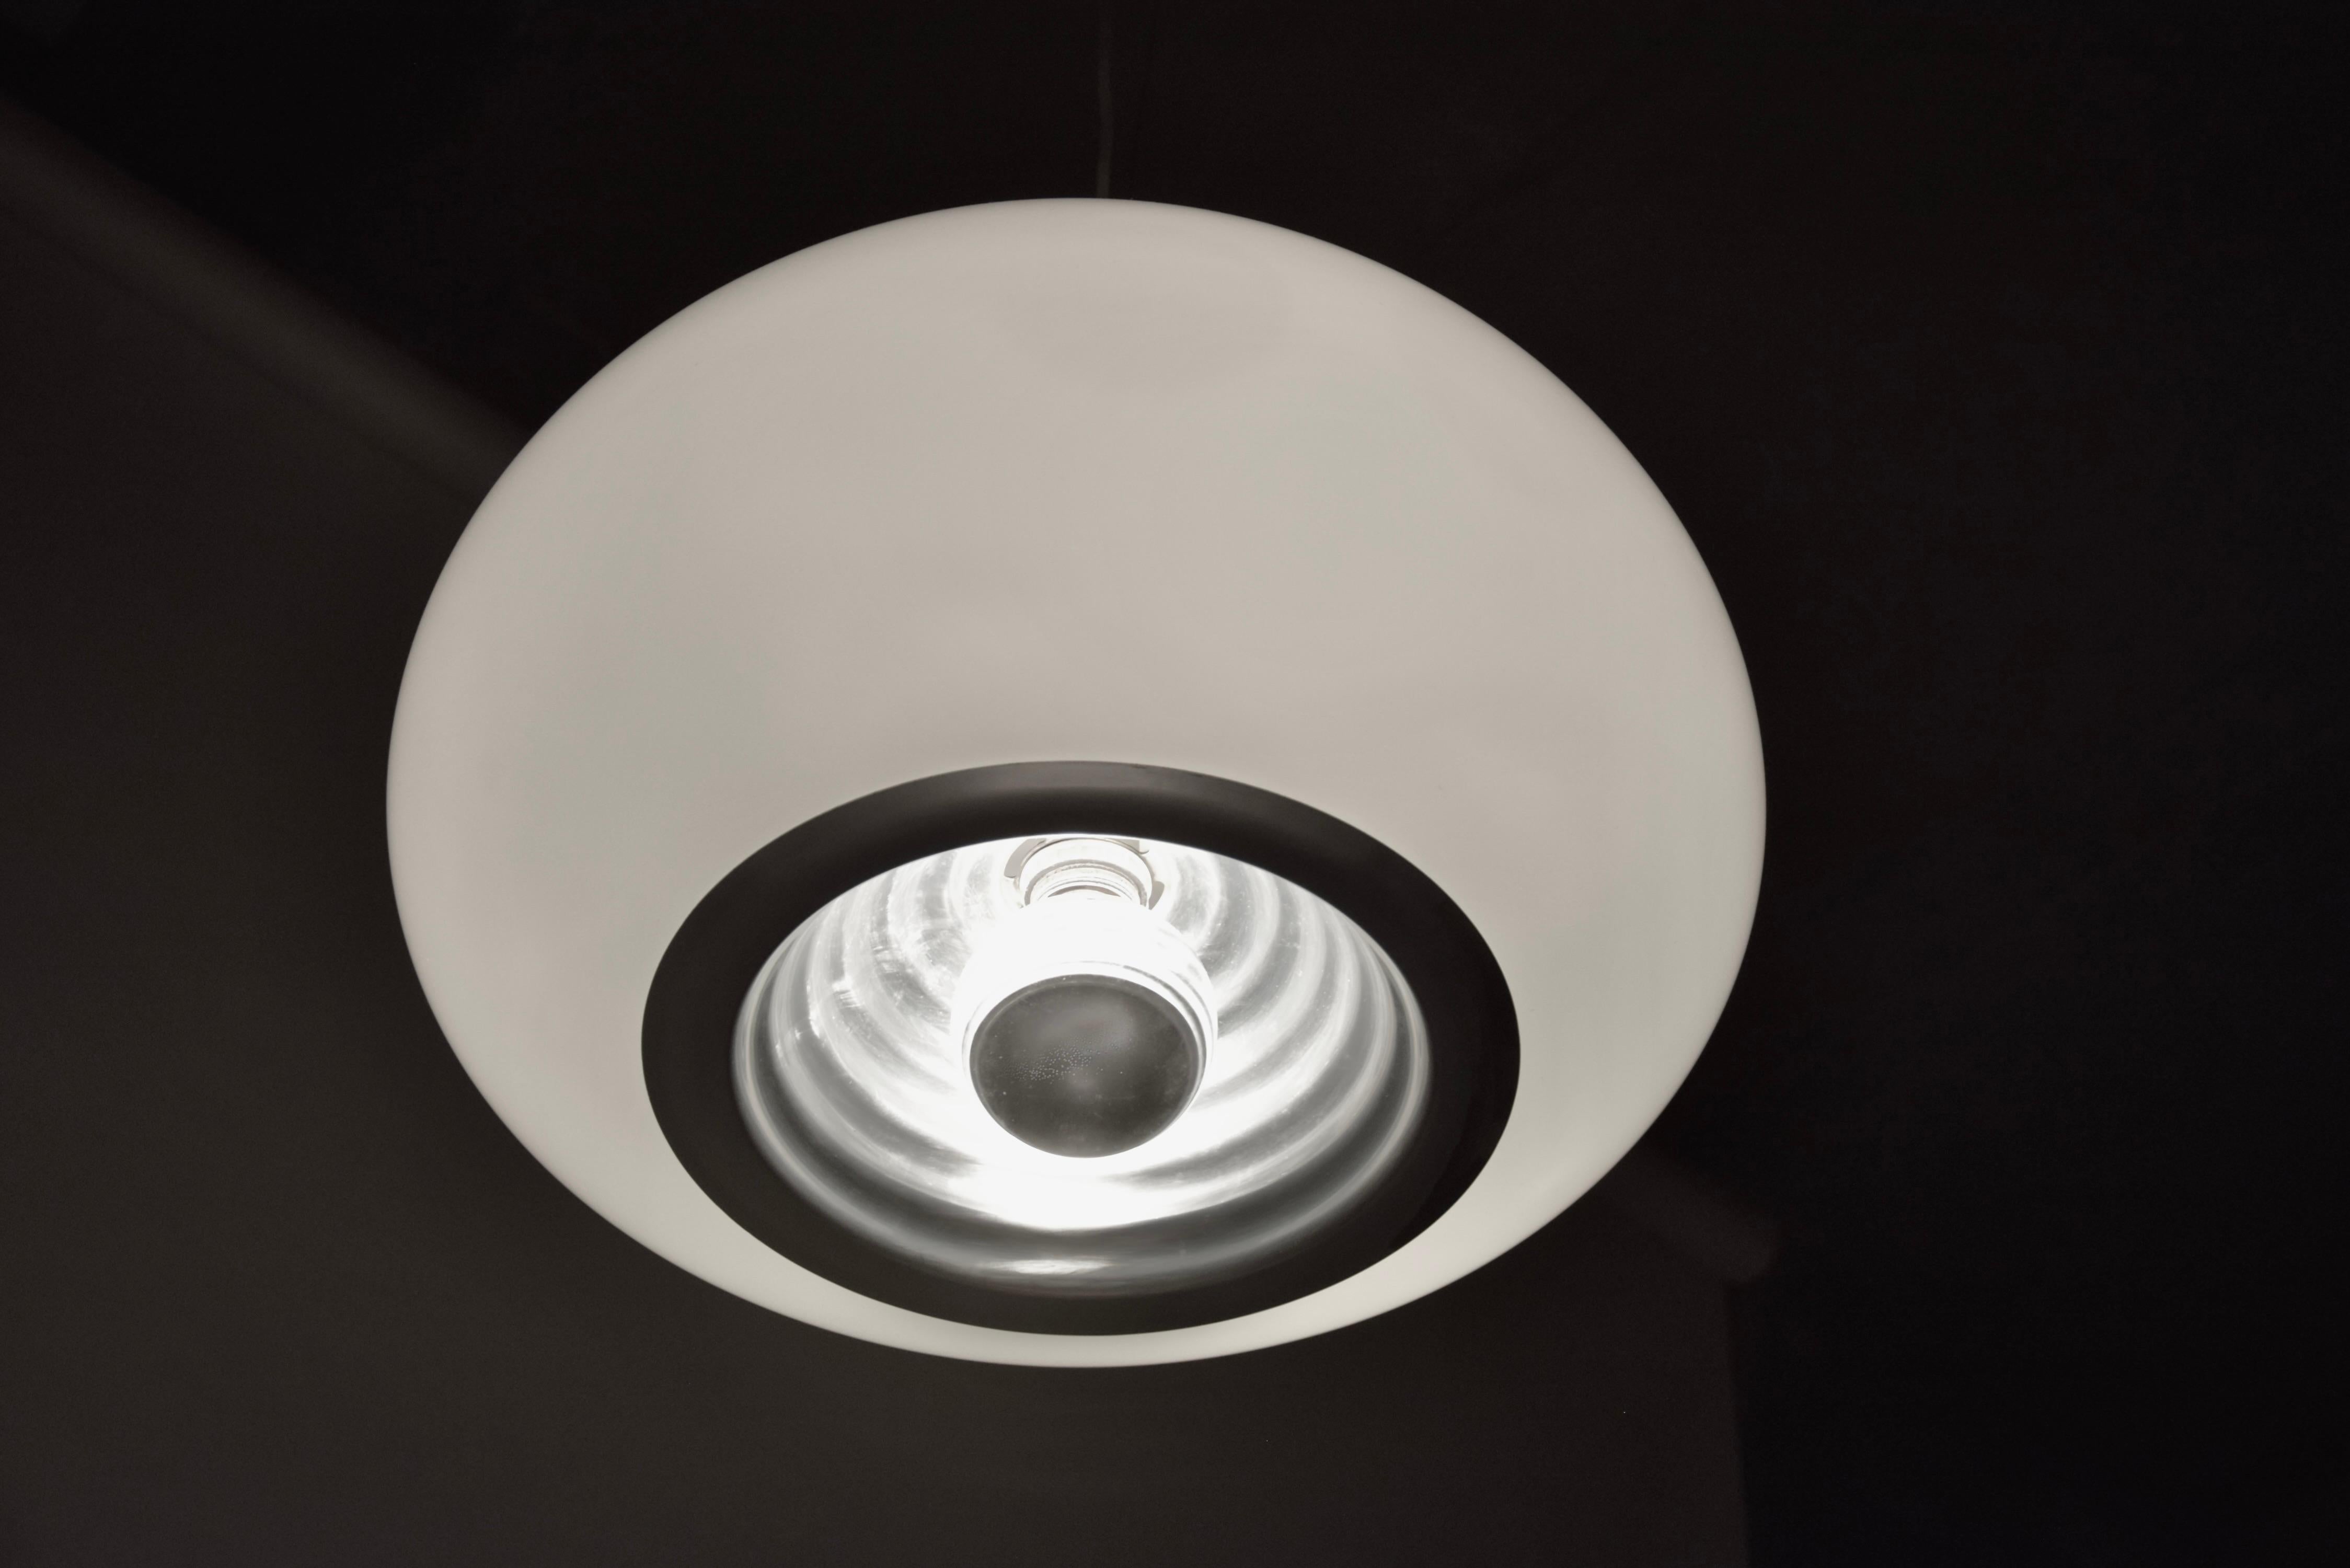 Illuminate your space with timeless elegance and innovative design with the iconic 